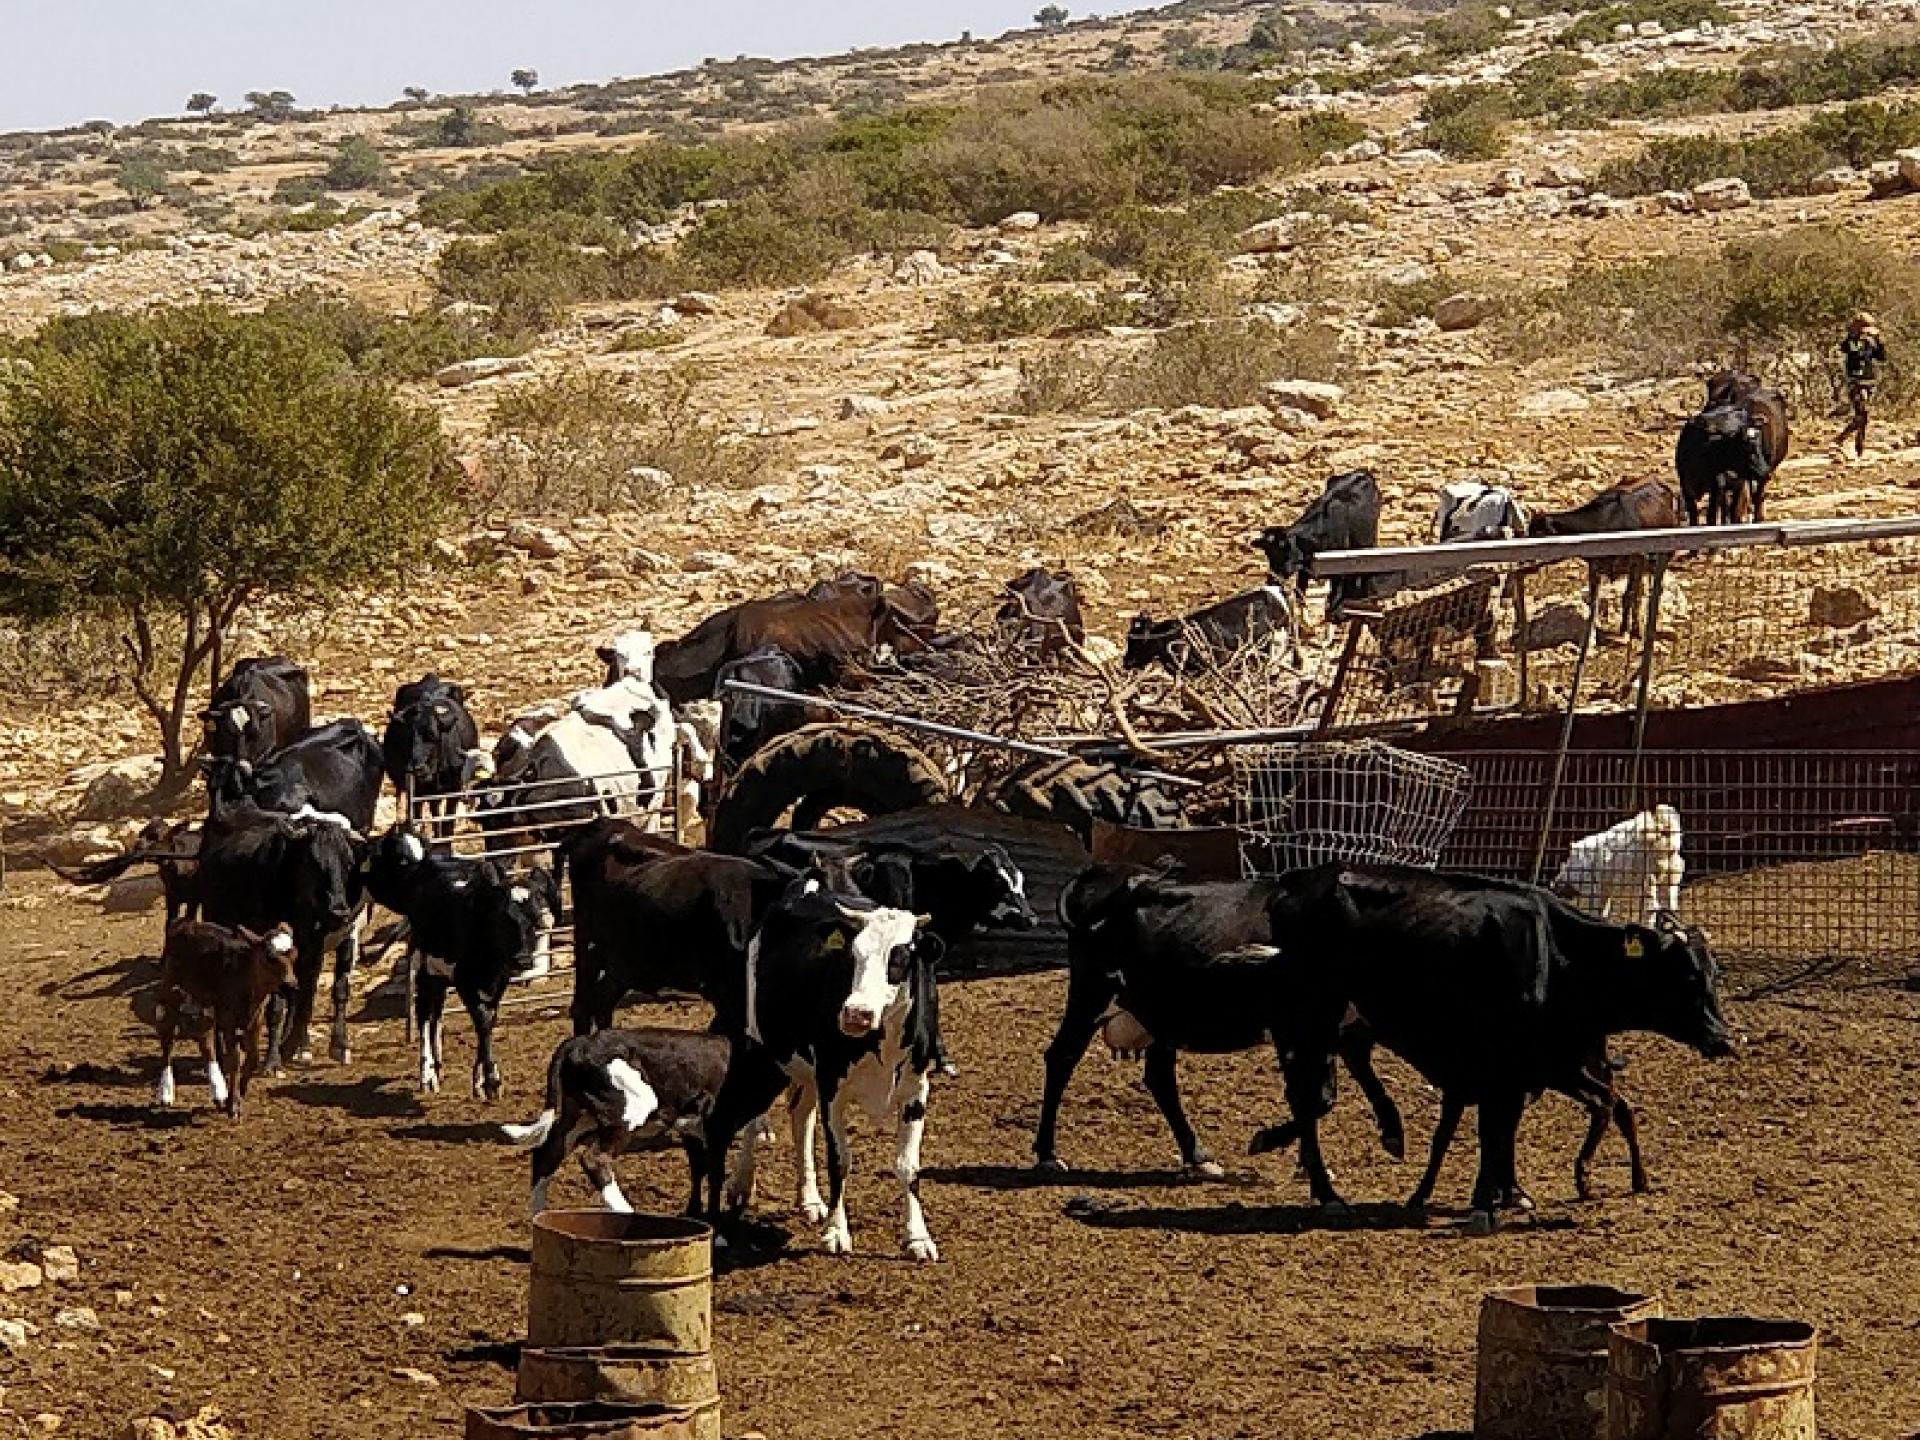 Yarza, Jordan Valley:  Bringing in the flock before the expulsion.